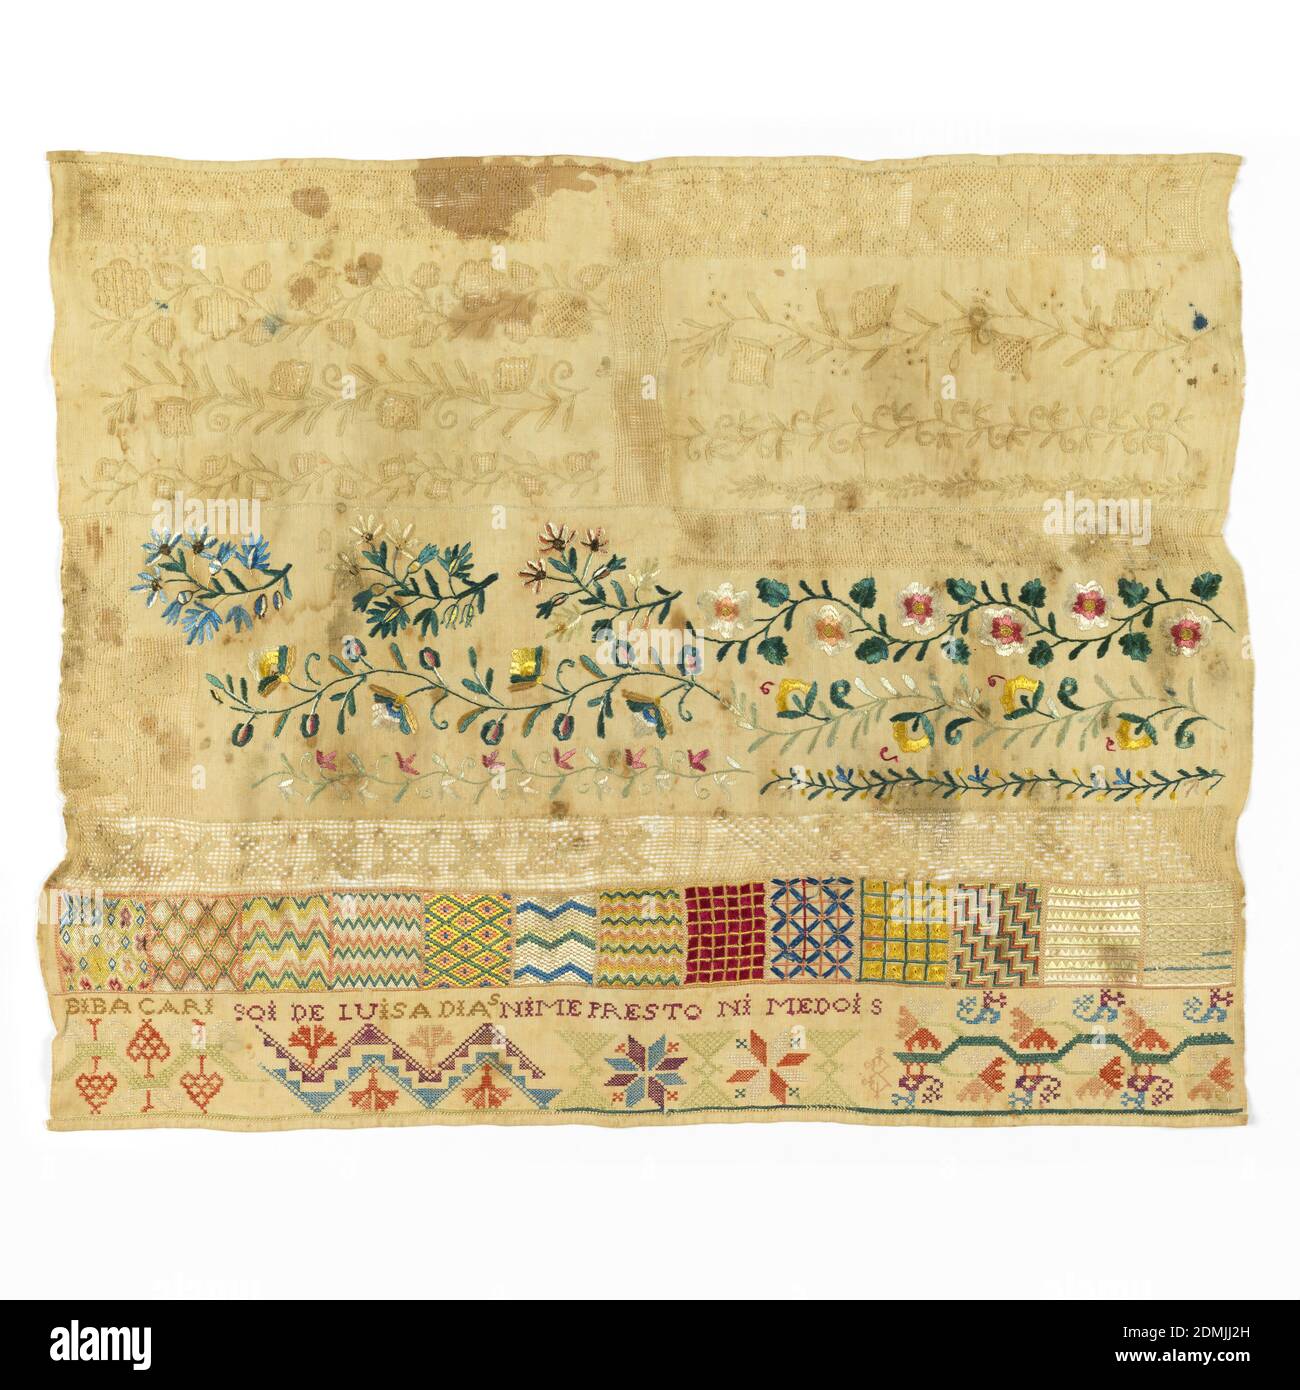 Sampler, Luisa Dias, Medium: silk embroidery on linen foundation Technique: embroidered in cross, satin, stem, and buttonhole stitches, with withdrawn element work with needle made fillings, on plain weave foundation, Bands of whitework and withdrawn element work at top, with floral borders and geometric fills in polychrome silks., Mexico, 19th century, embroidery & stitching, Sampler Stock Photo